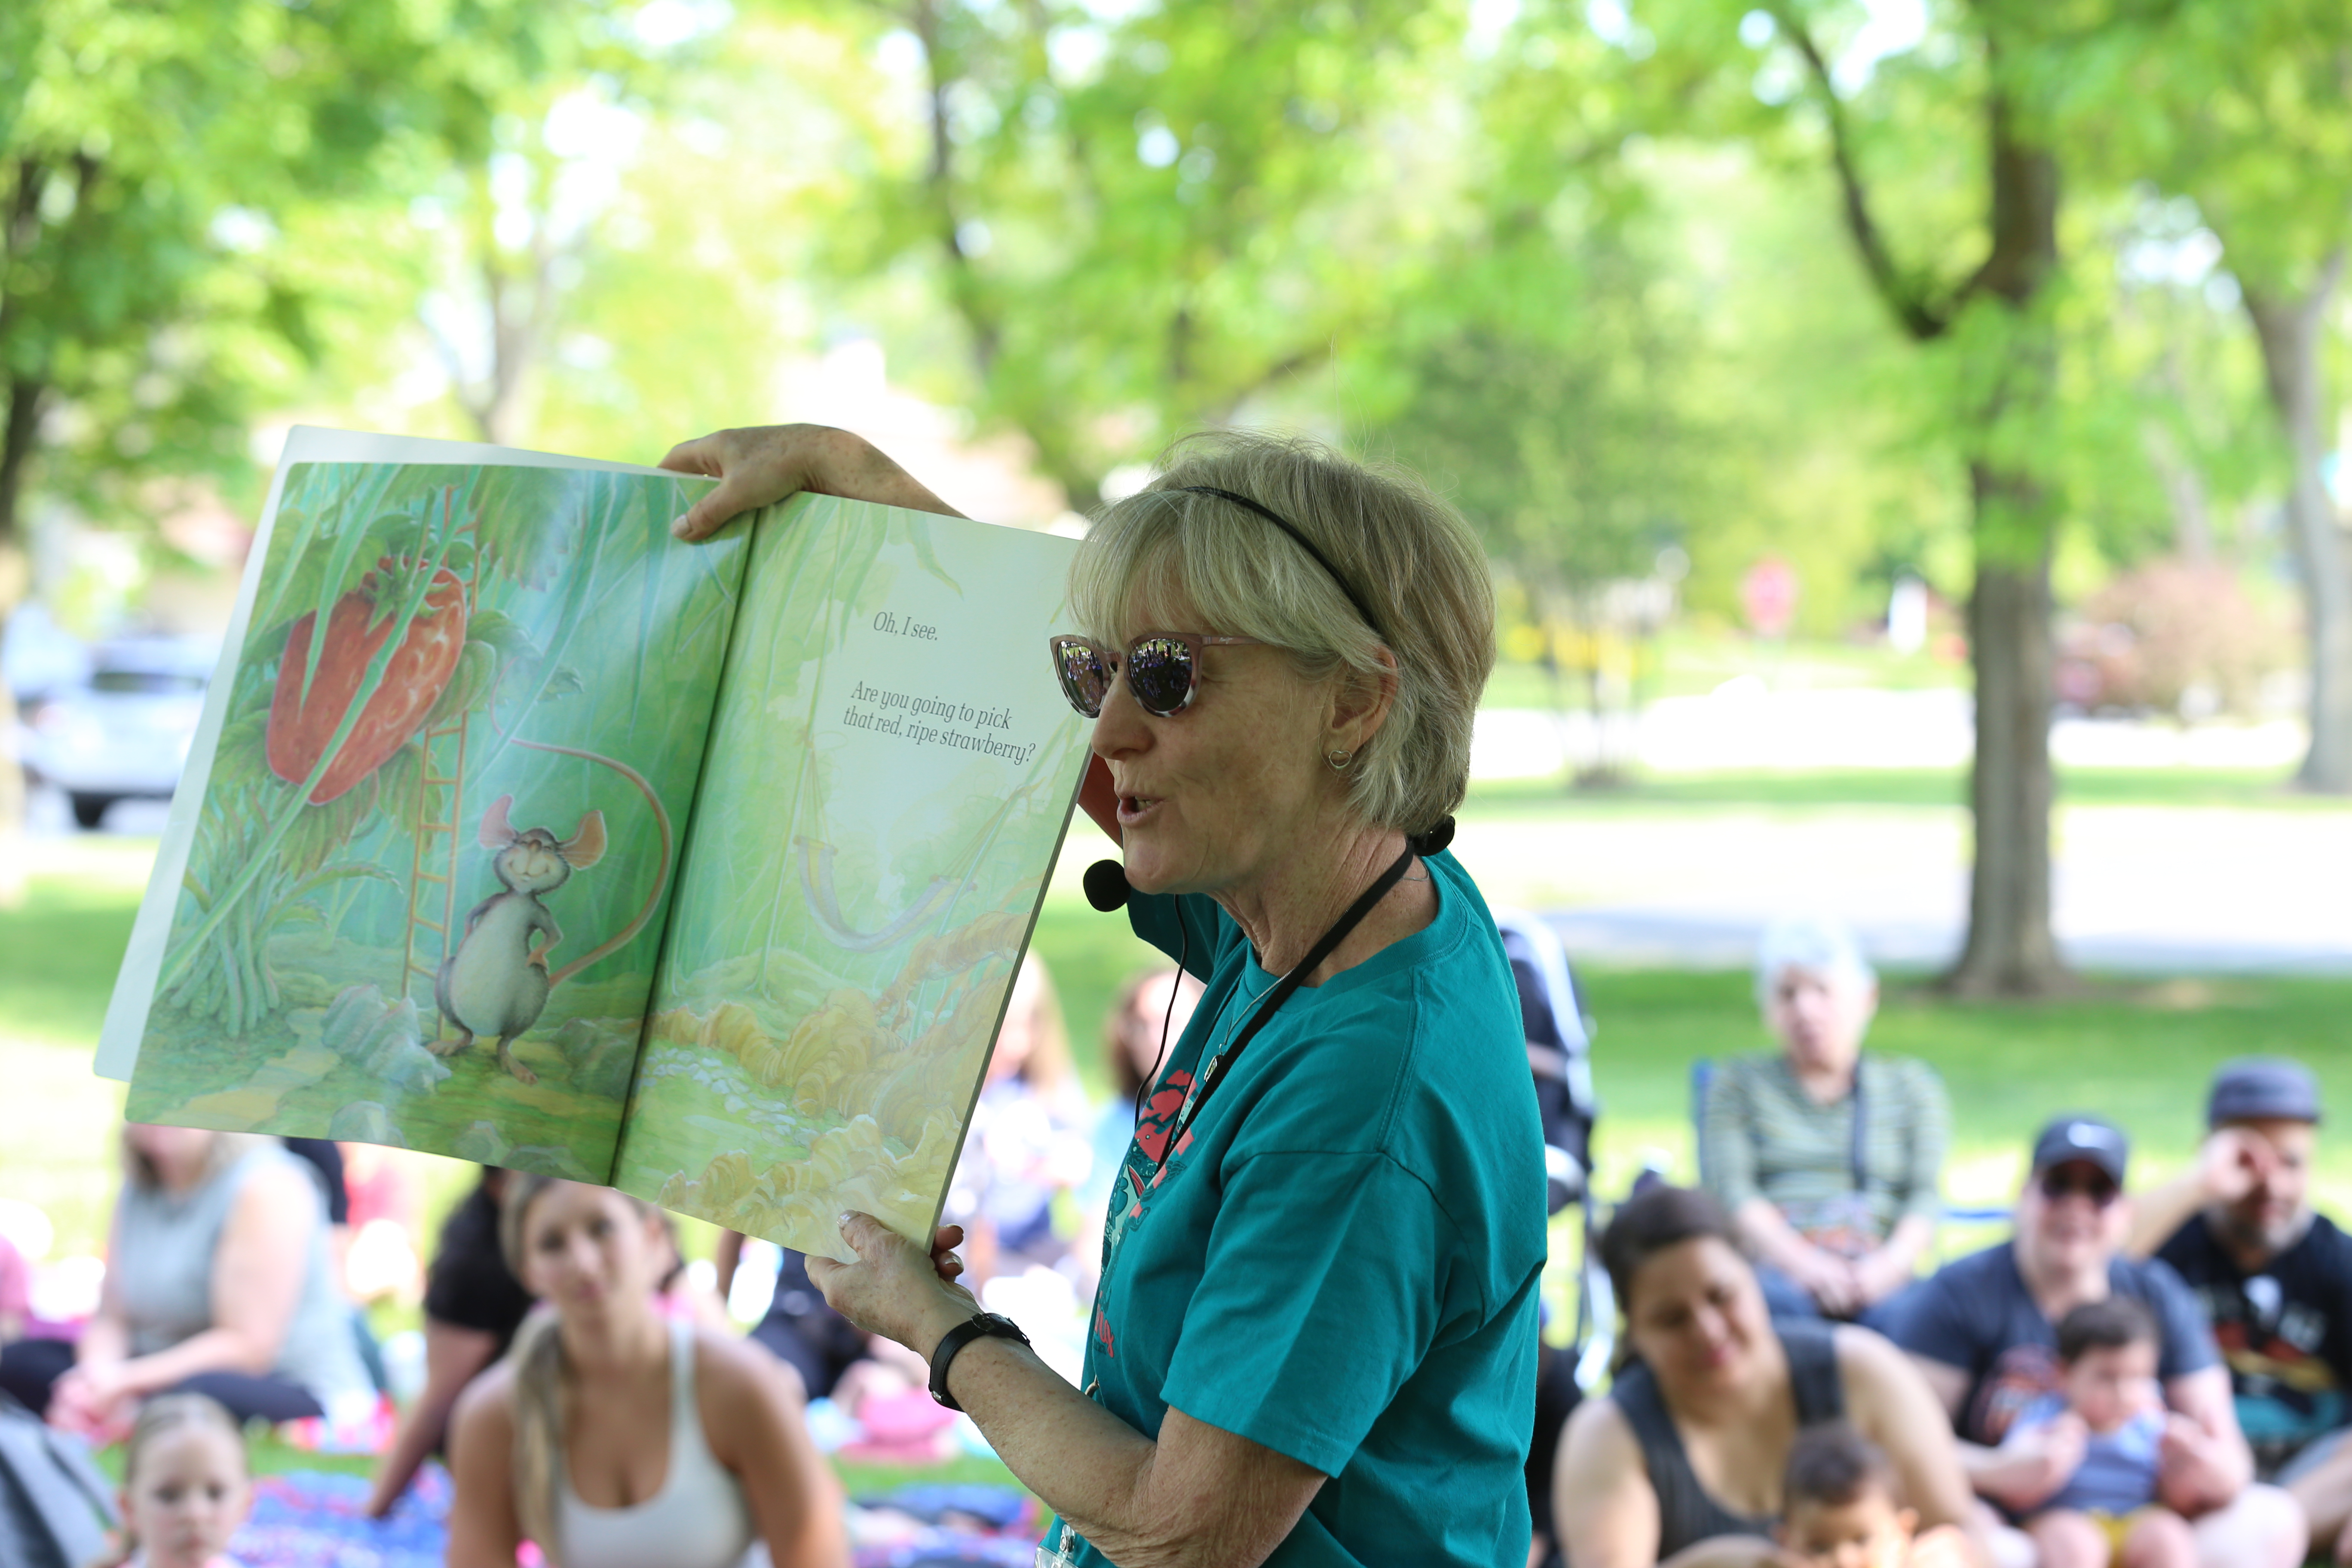 Storytime in the Park – Bringing Literacy Outdoors